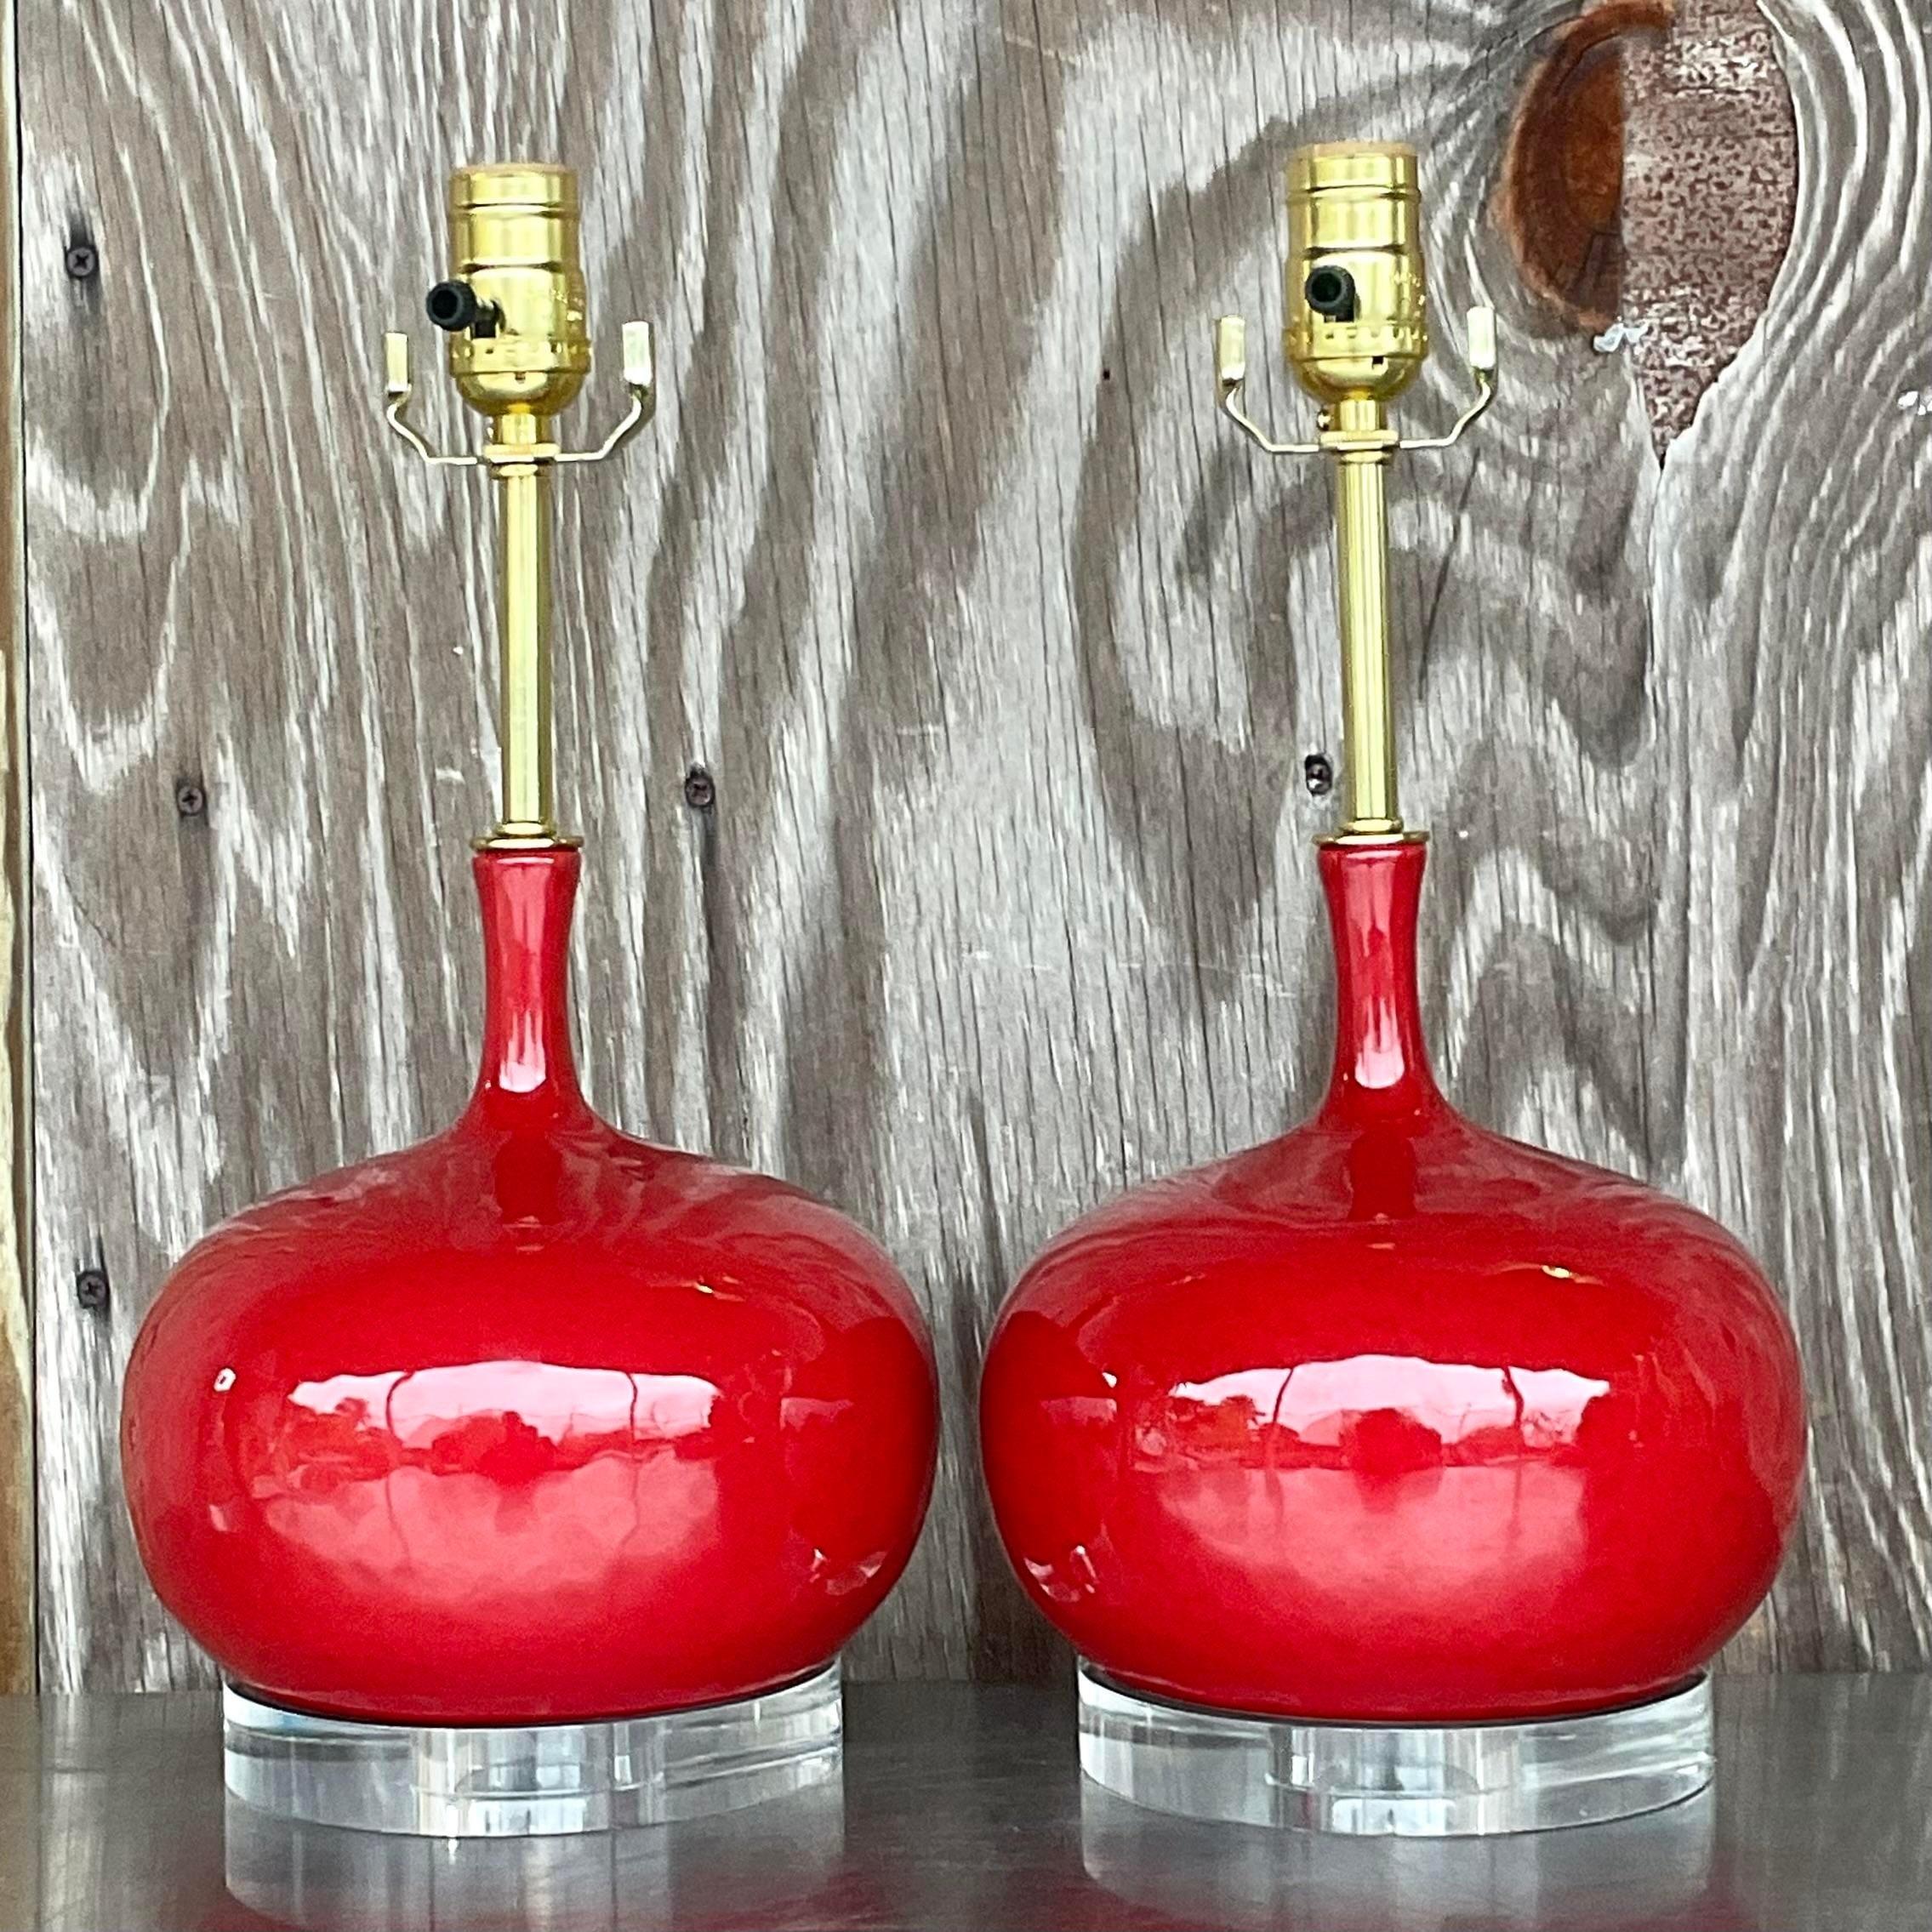 Vintage Regency Glazed Ceramic Onion Bulb Lamps - a Pair In Good Condition For Sale In west palm beach, FL